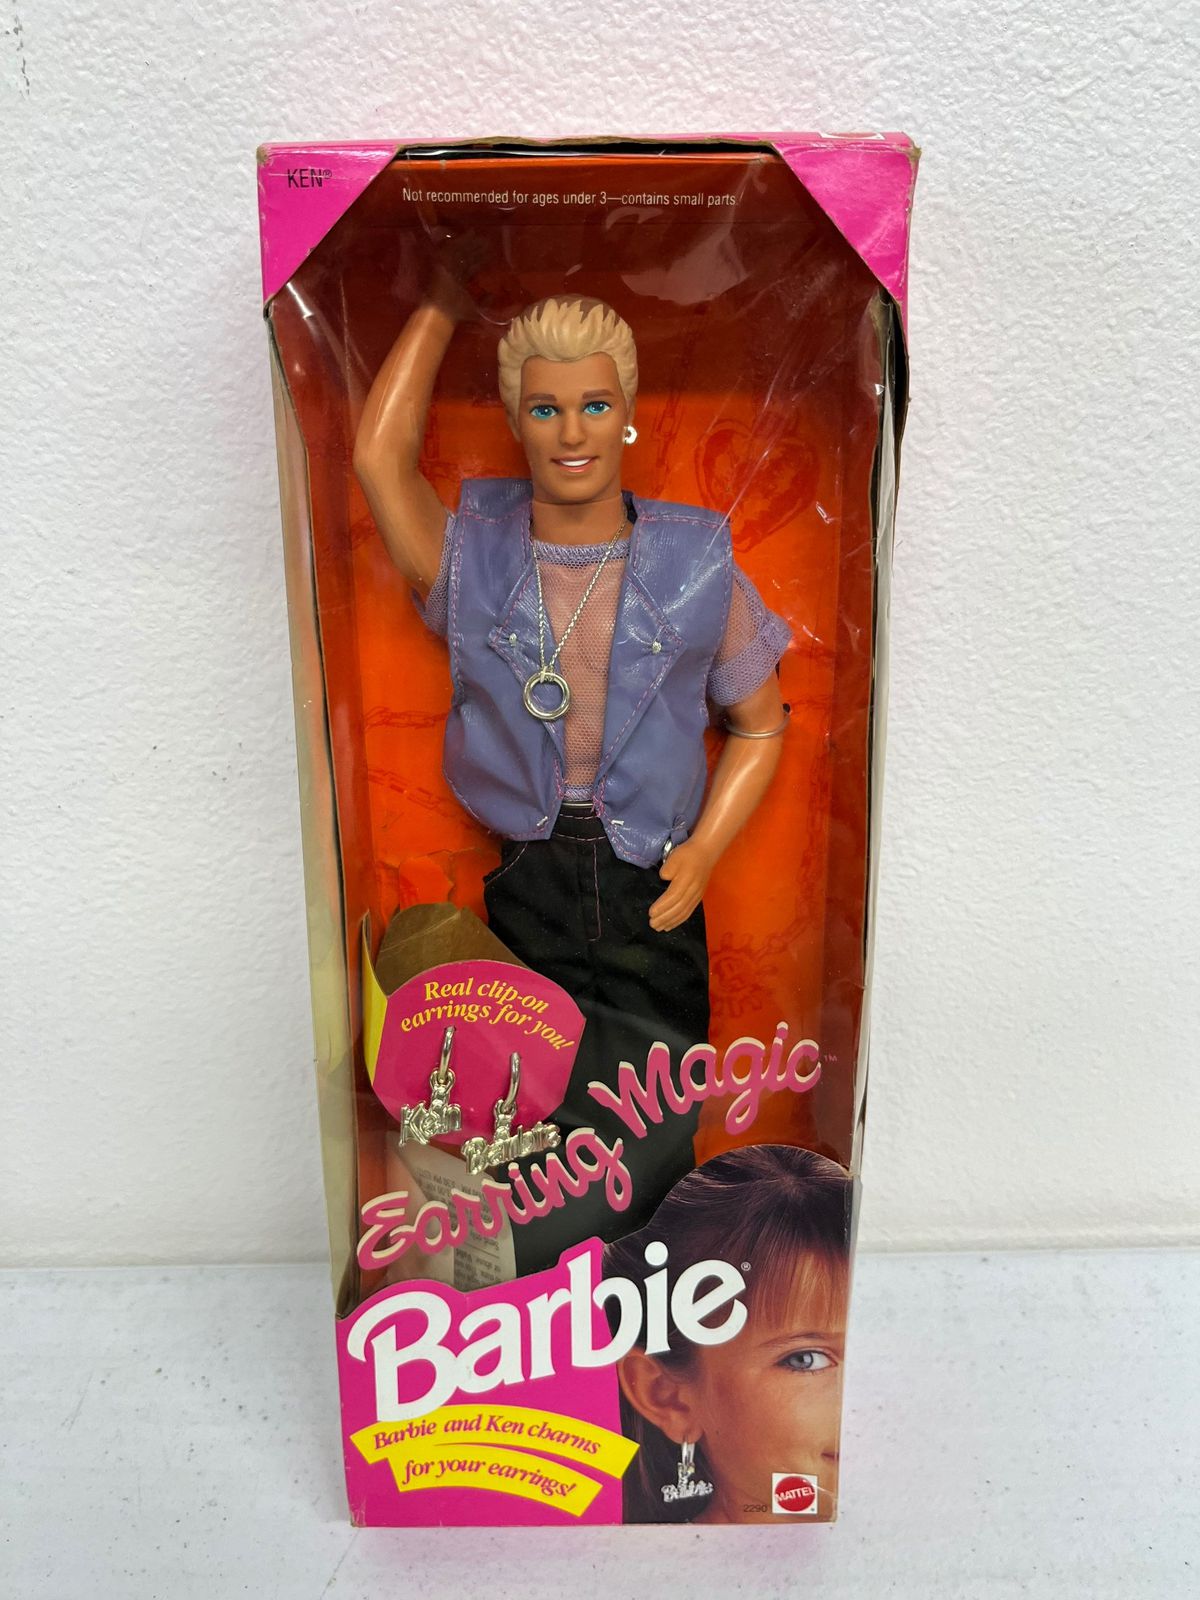 A product shot of Earring Magic Ken in the box: A Ken doll with brown-and-blonde streaked hair, a purple mesh shirt and purple pleather vest, and a very visible silver ring on a chain around his neck